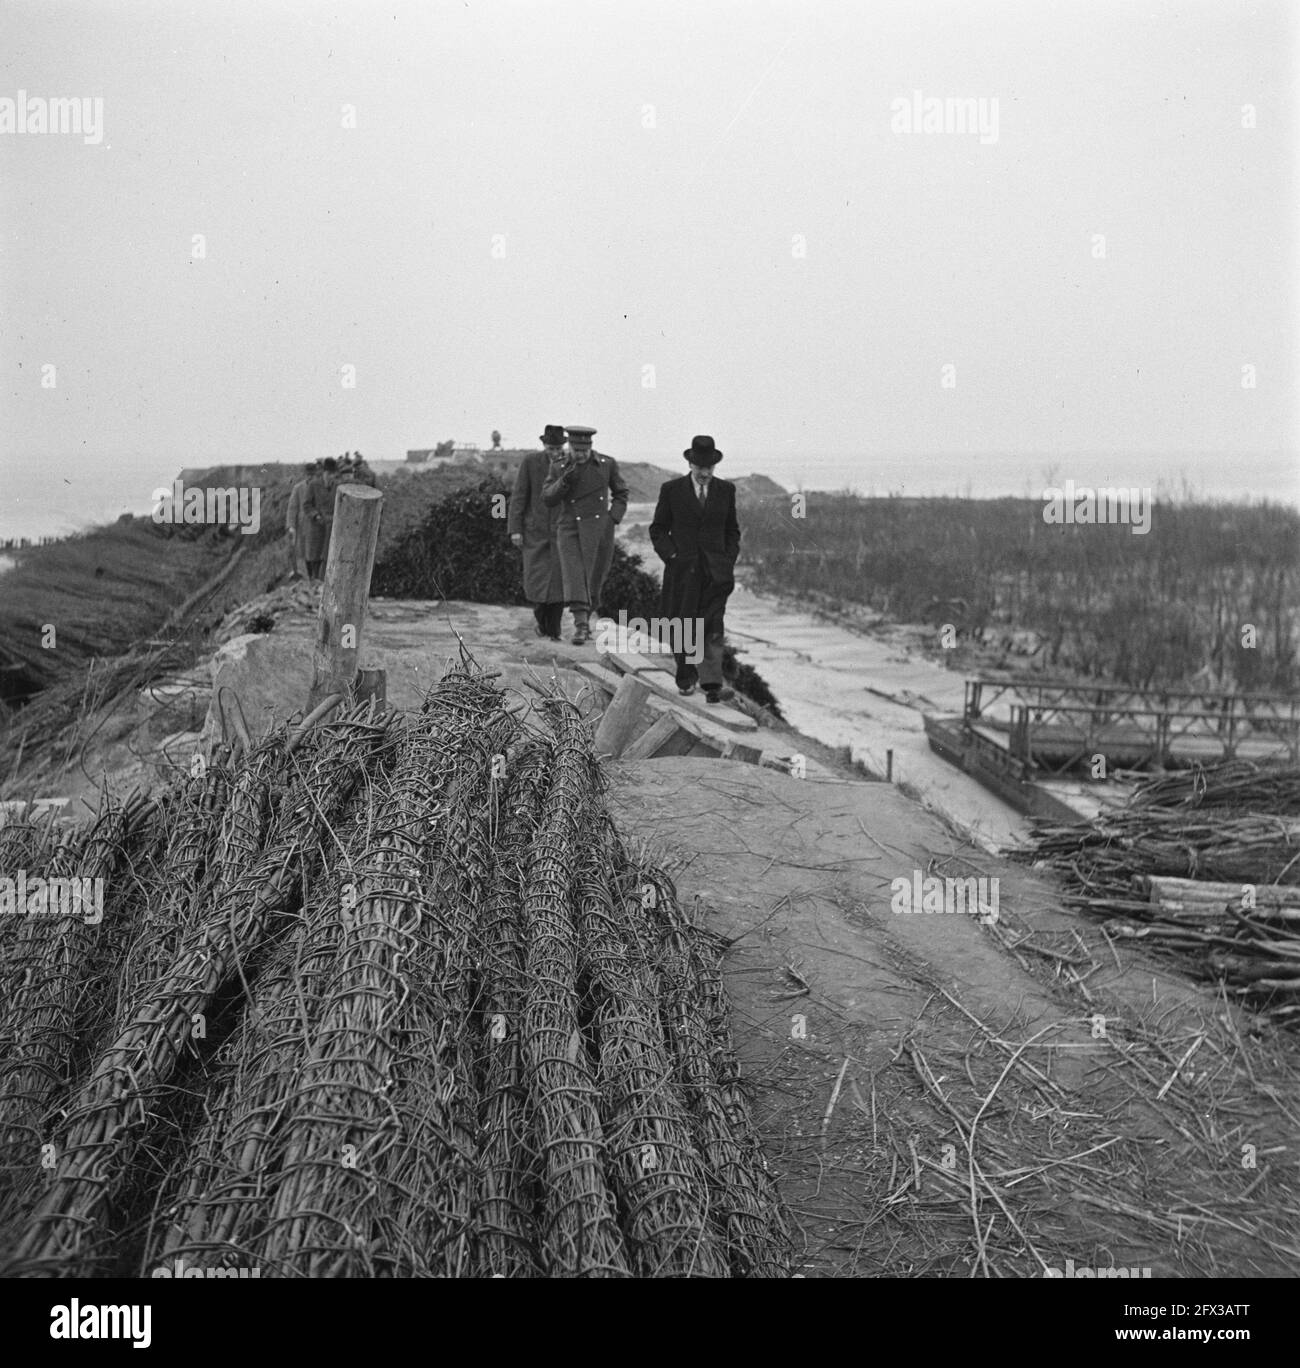 Minister Attlee during a walk along the destroyed coastal defenses, March 10, 1945, military, ministers, The Netherlands, 20th century press agency photo, news to remember, documentary, historic photography 1945-1990, visual stories, human history of the Twentieth Century, capturing moments in time Stock Photo